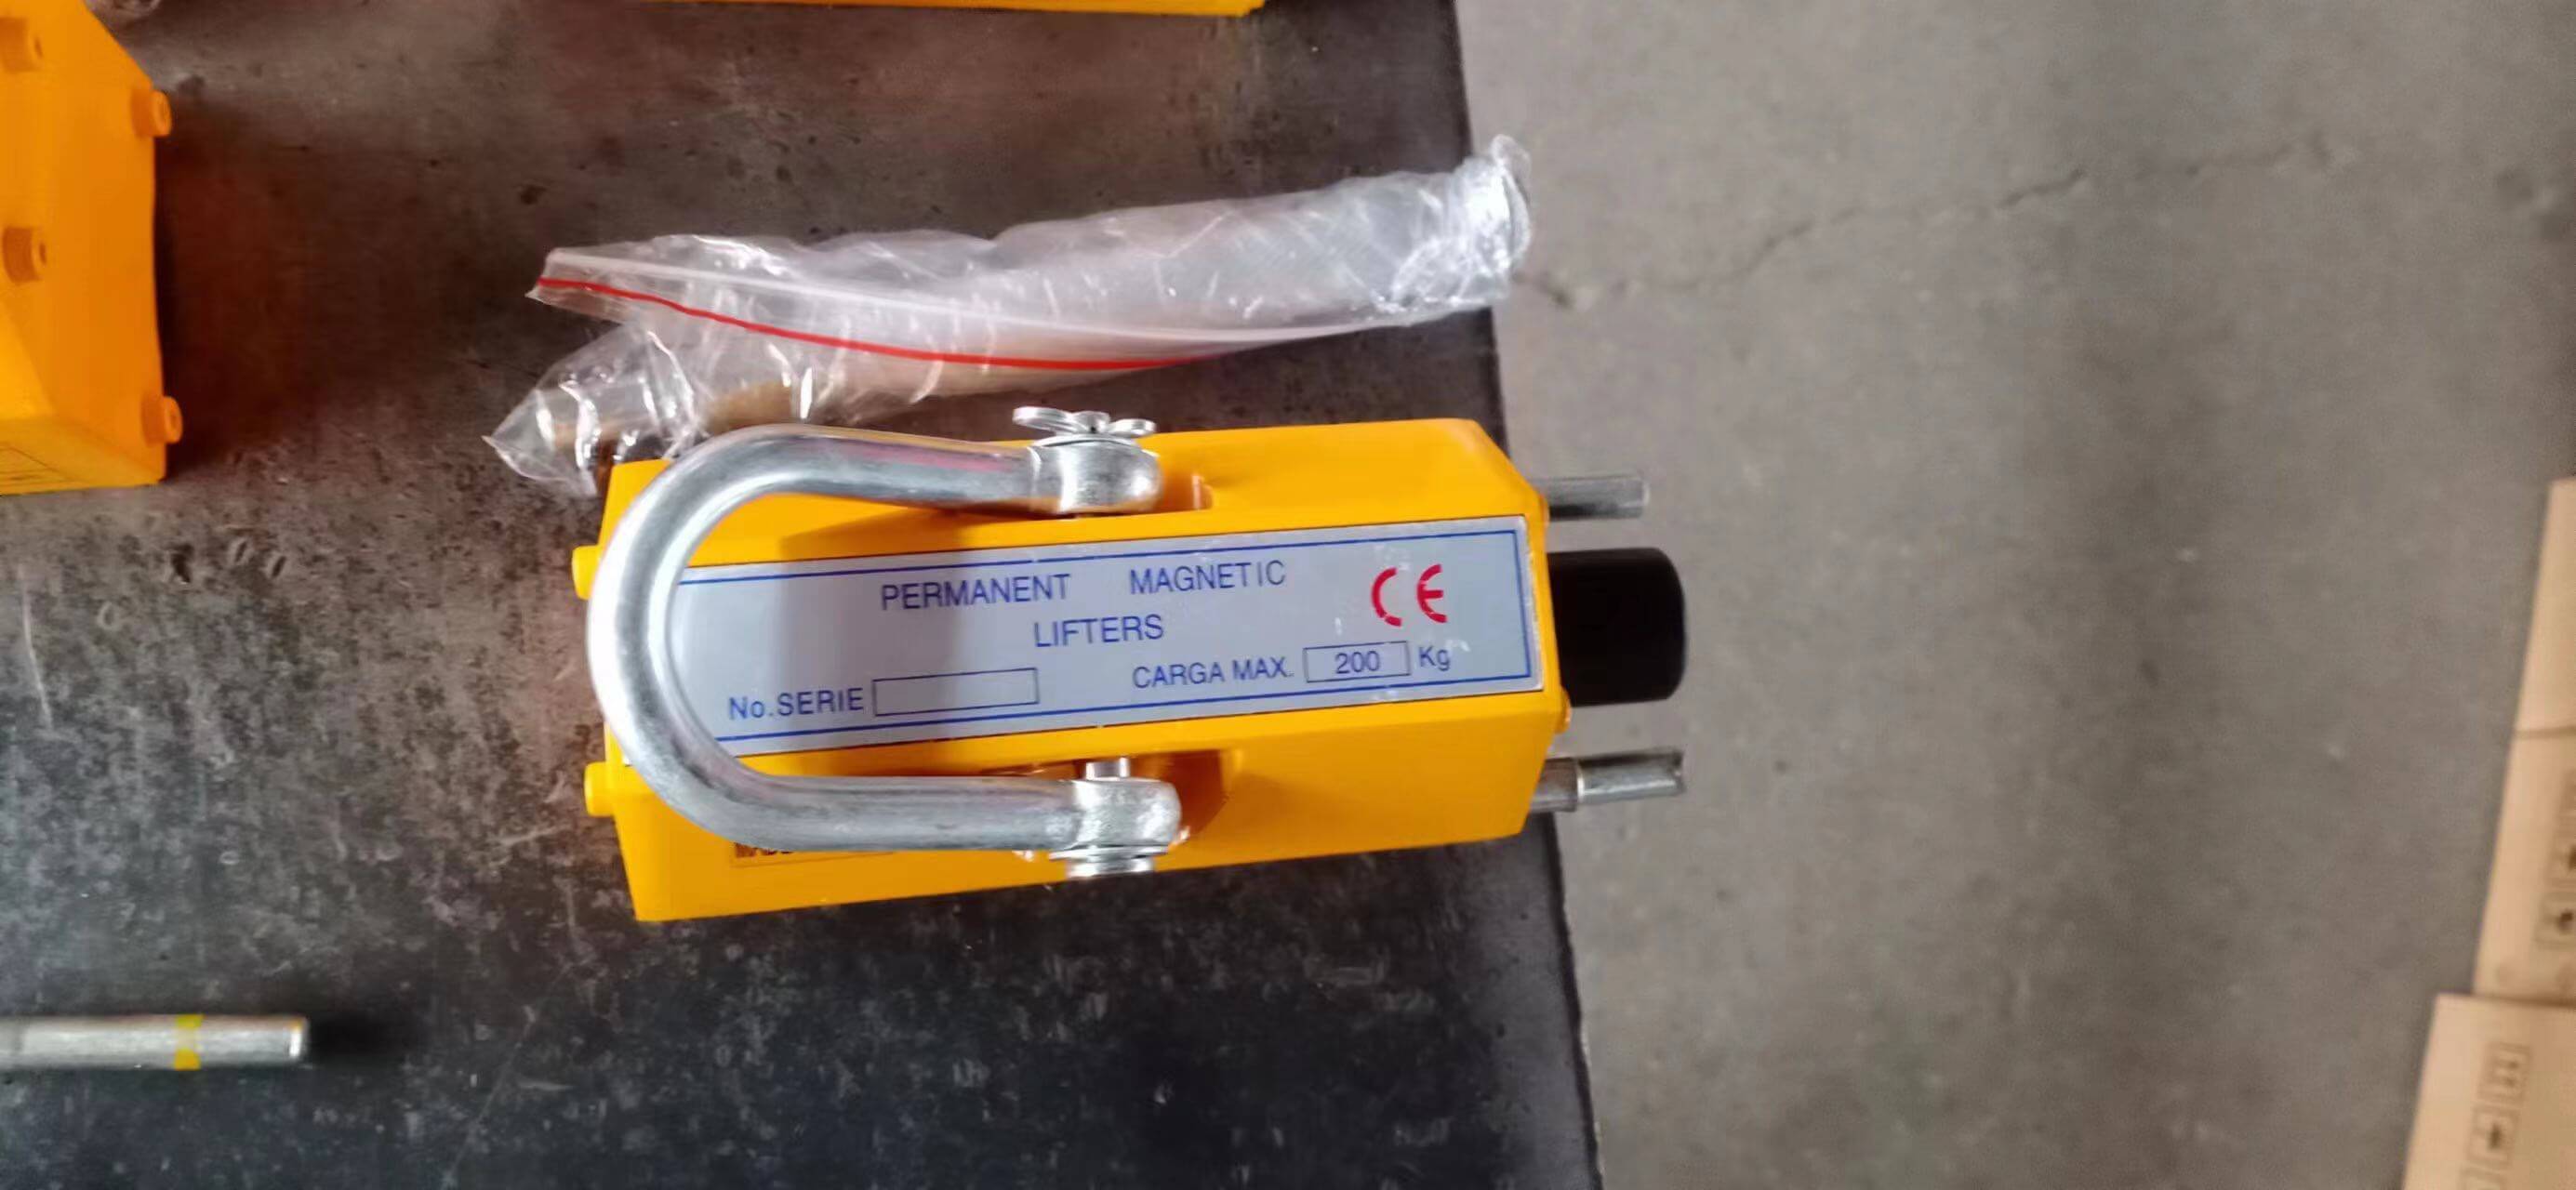 100, 300 and 1000 Permanent Magnet Lifter-1.jpg